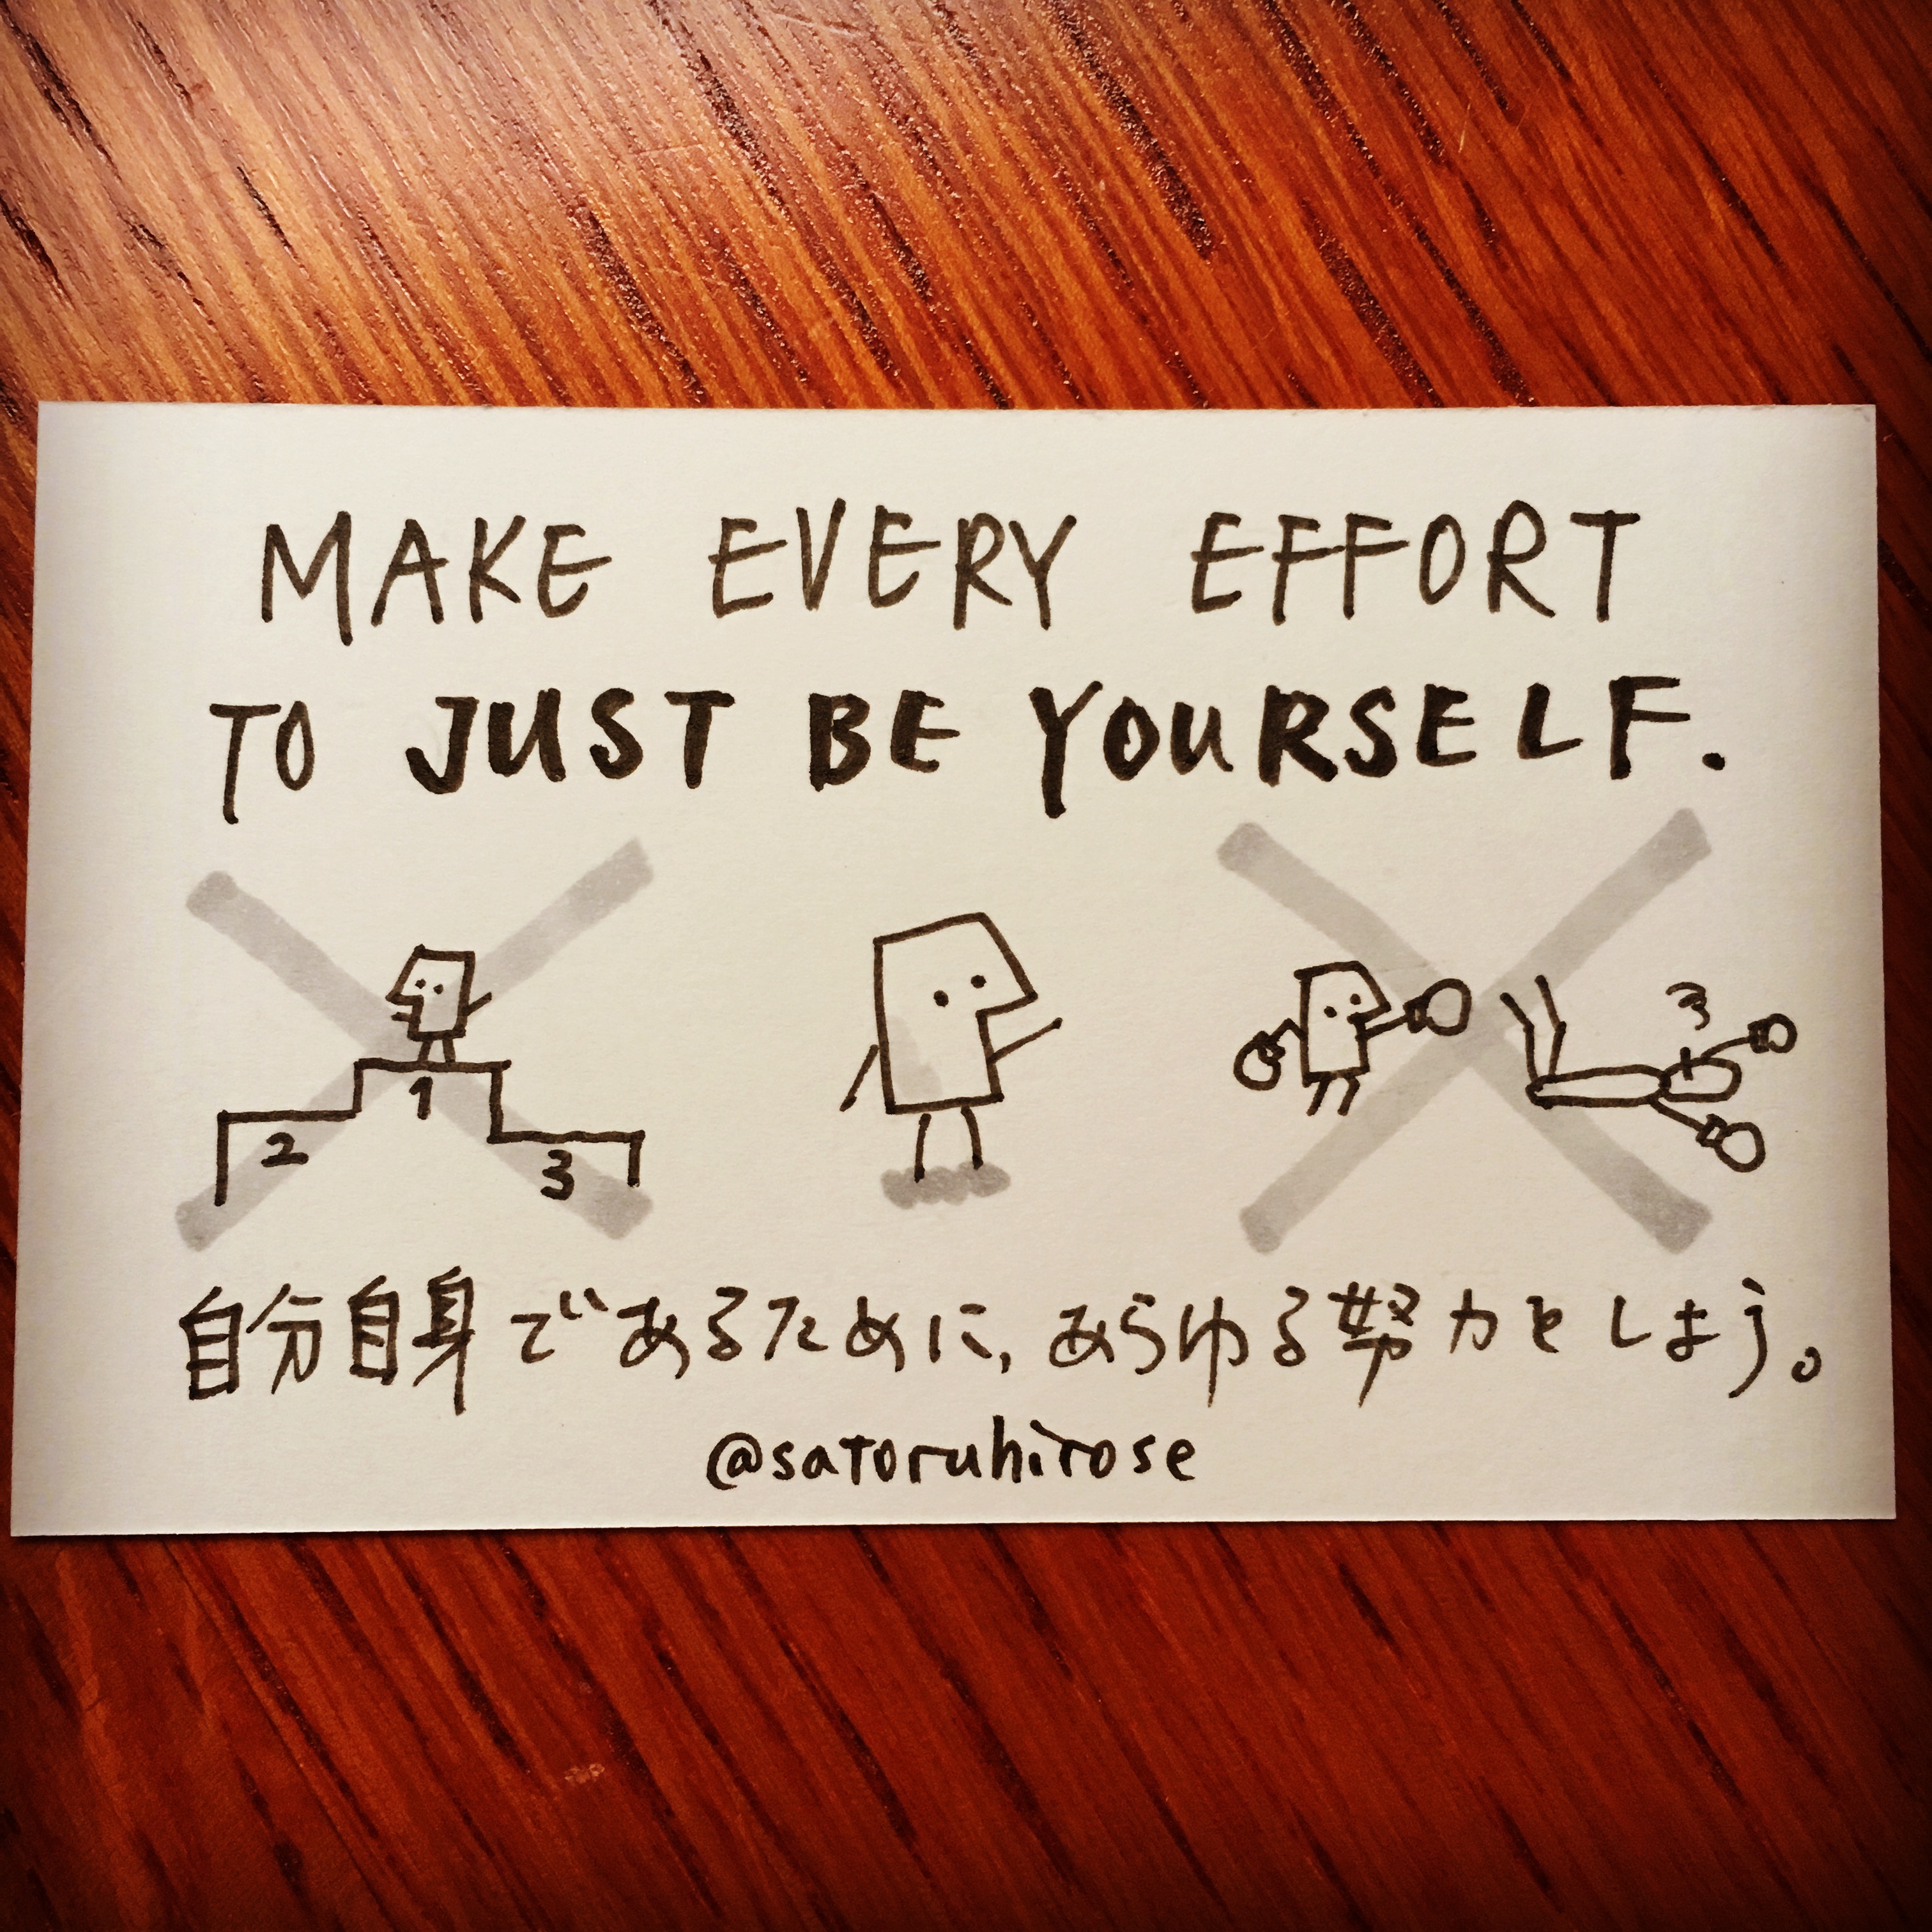 Make every effort to just be yourself.